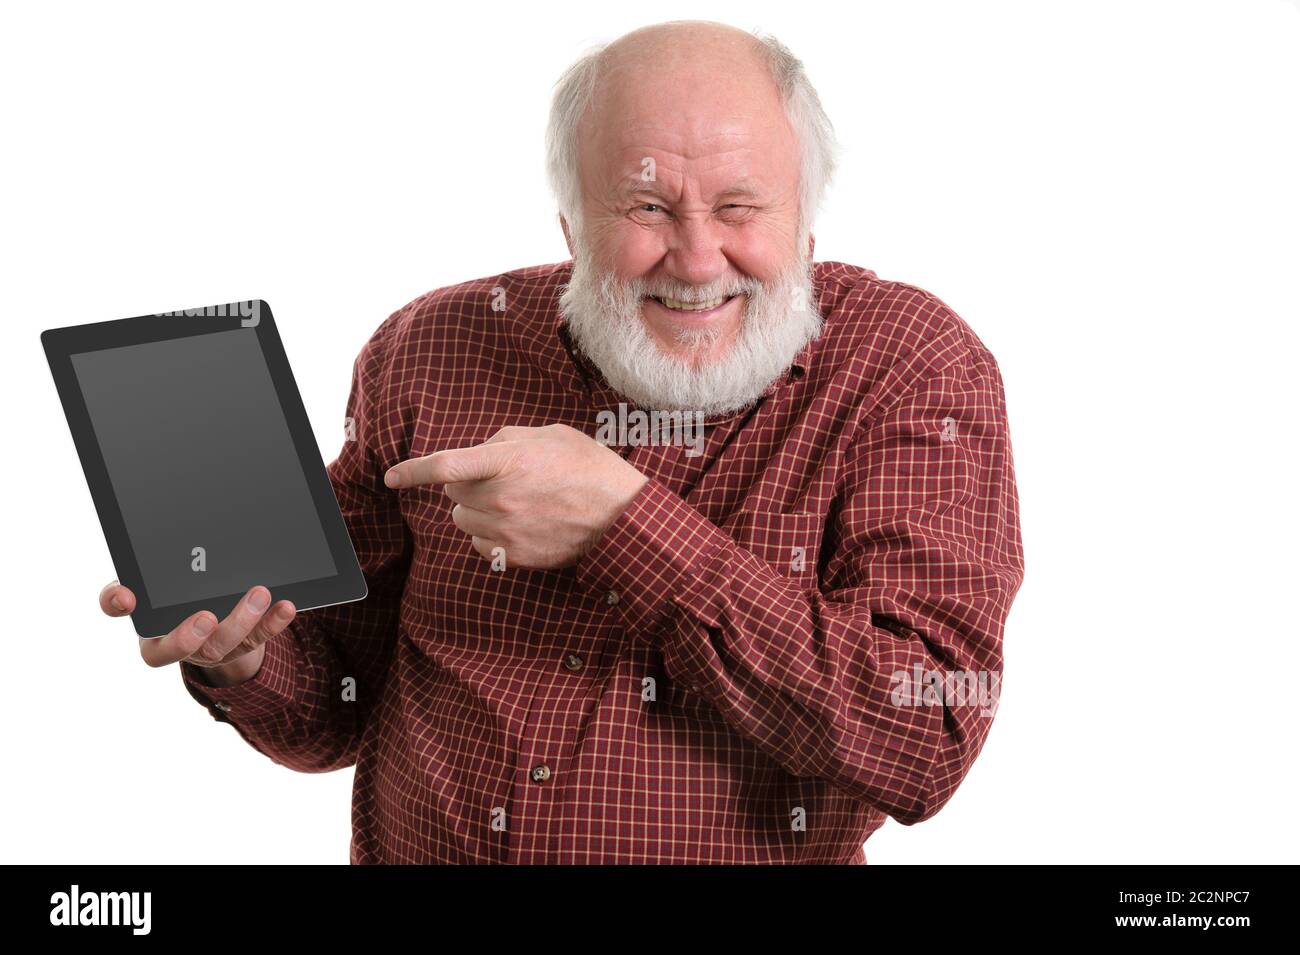 Funny old man using tablet computer isolated on white Banque D'Images